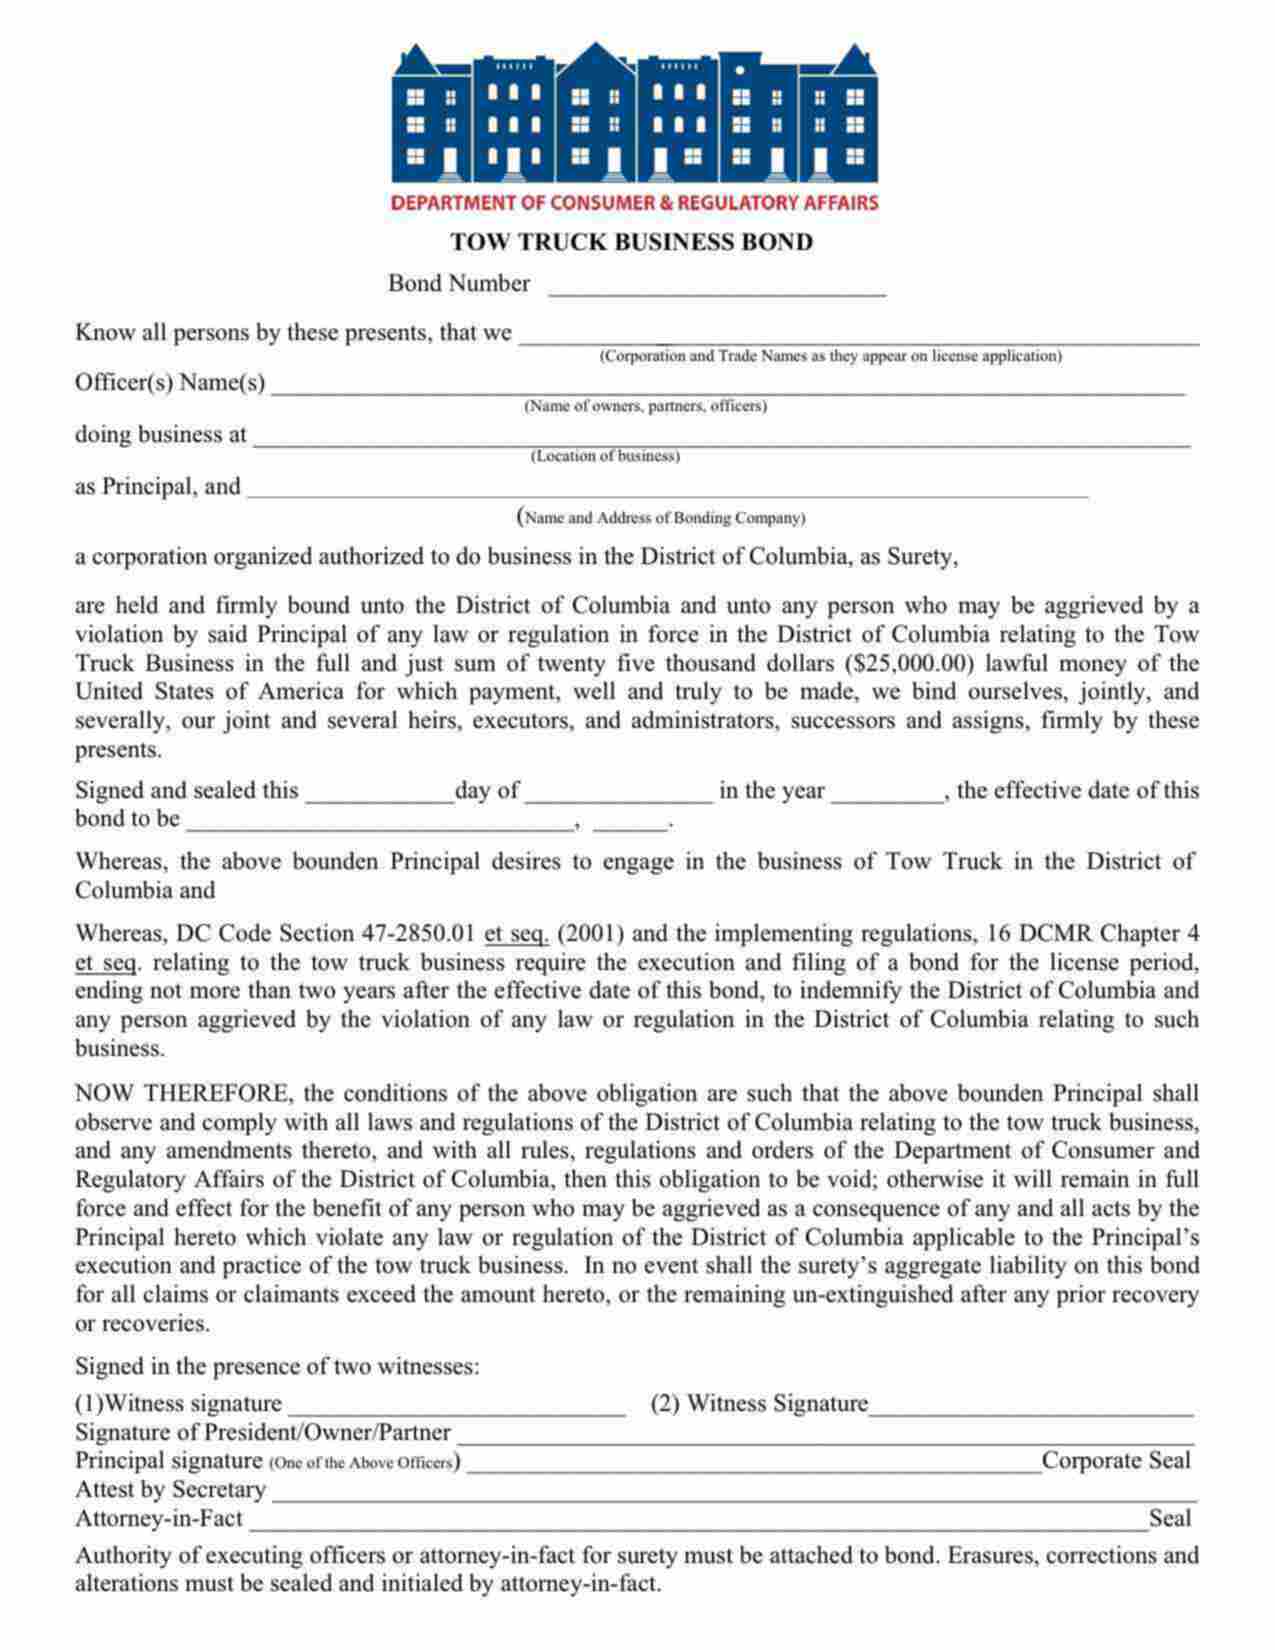 District of Columbia Tow Truck Business Bond Form